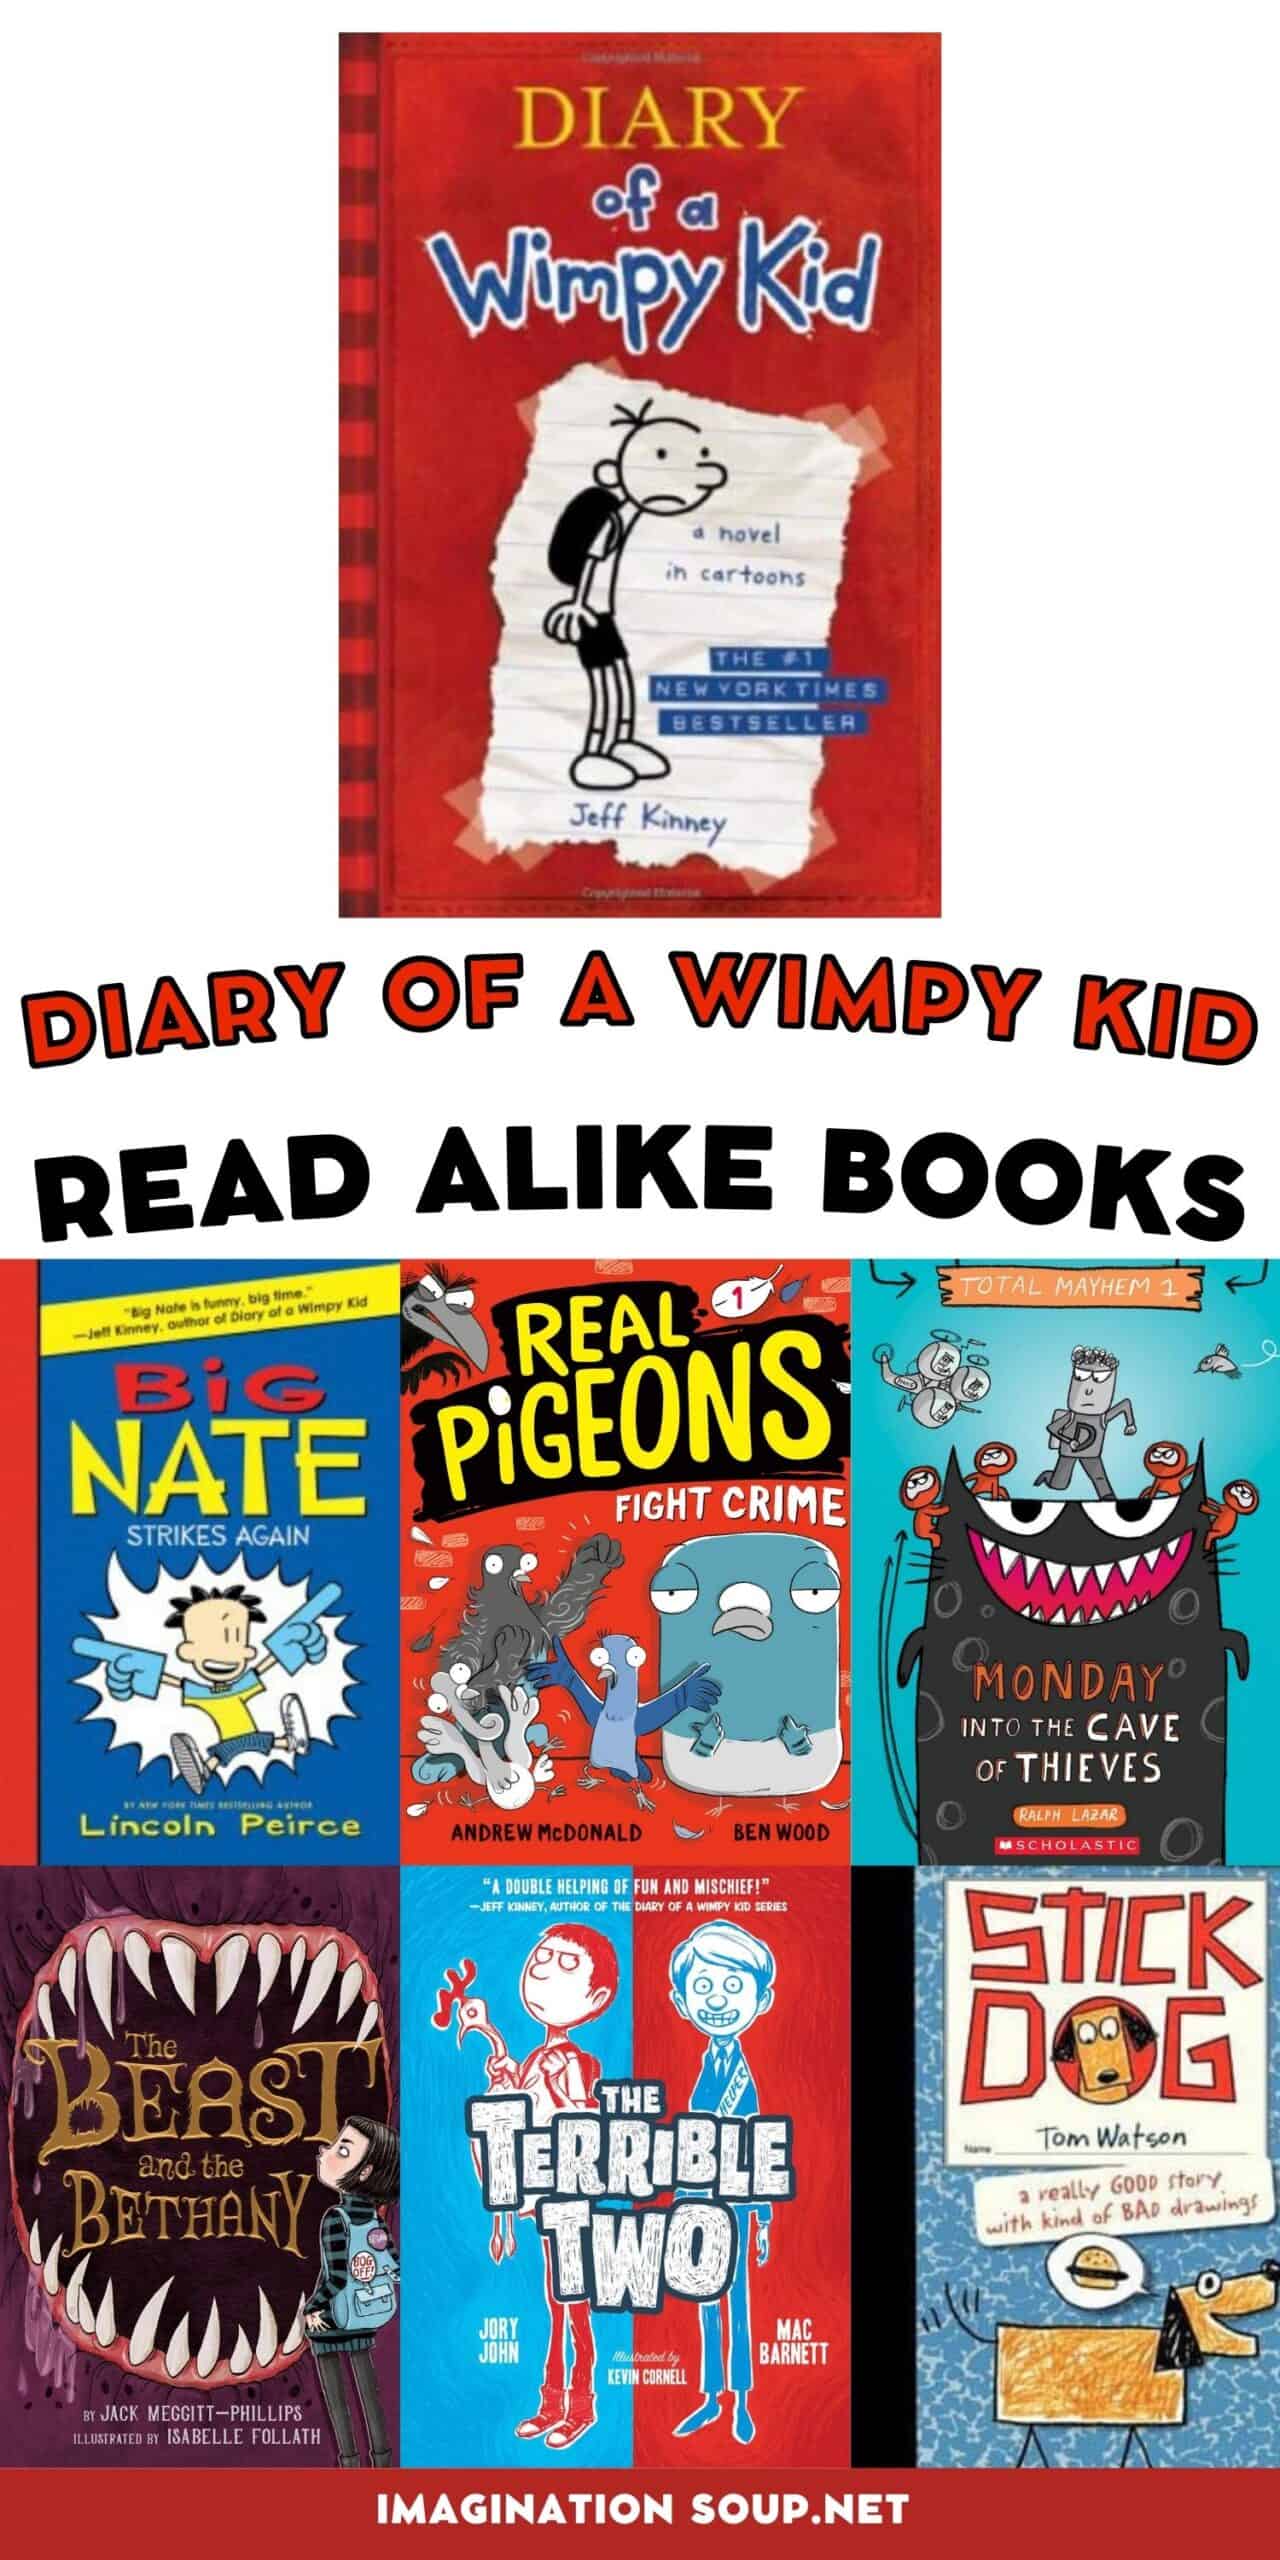 If You Love Diary of a Wimpy Kid, Try These Read Alike Books